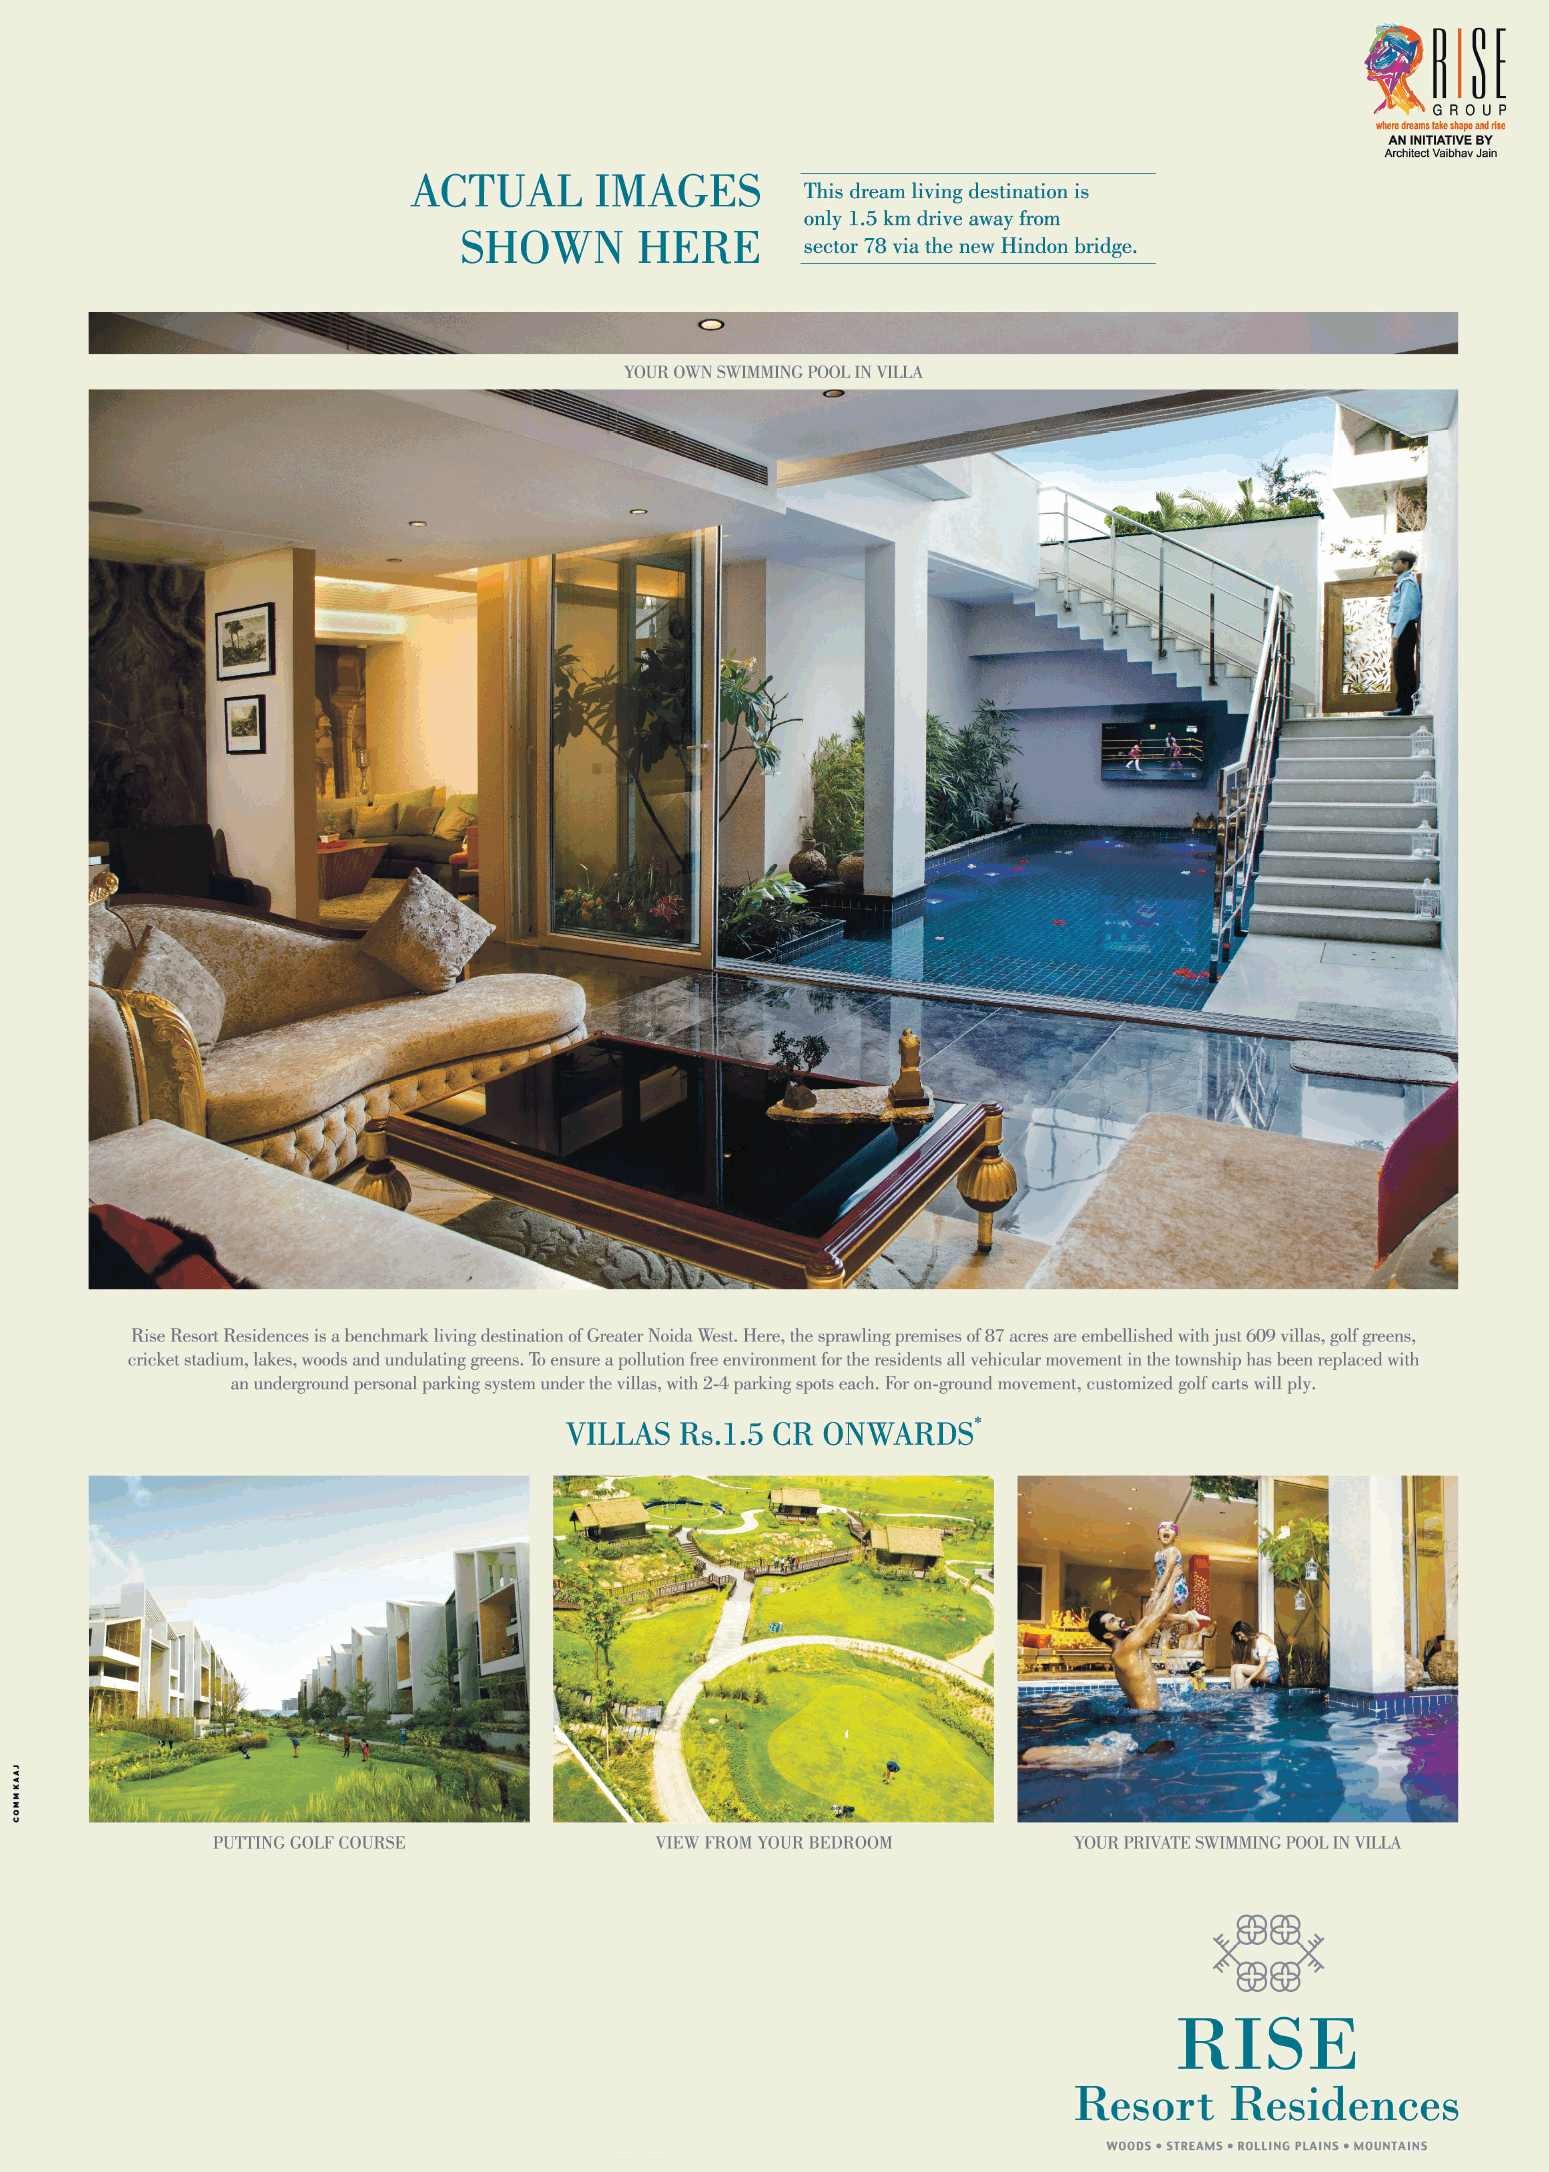 Introducing luxury villas at Rs. 1.5 Cr. at Rise Resort Residences in Greater Noida Update